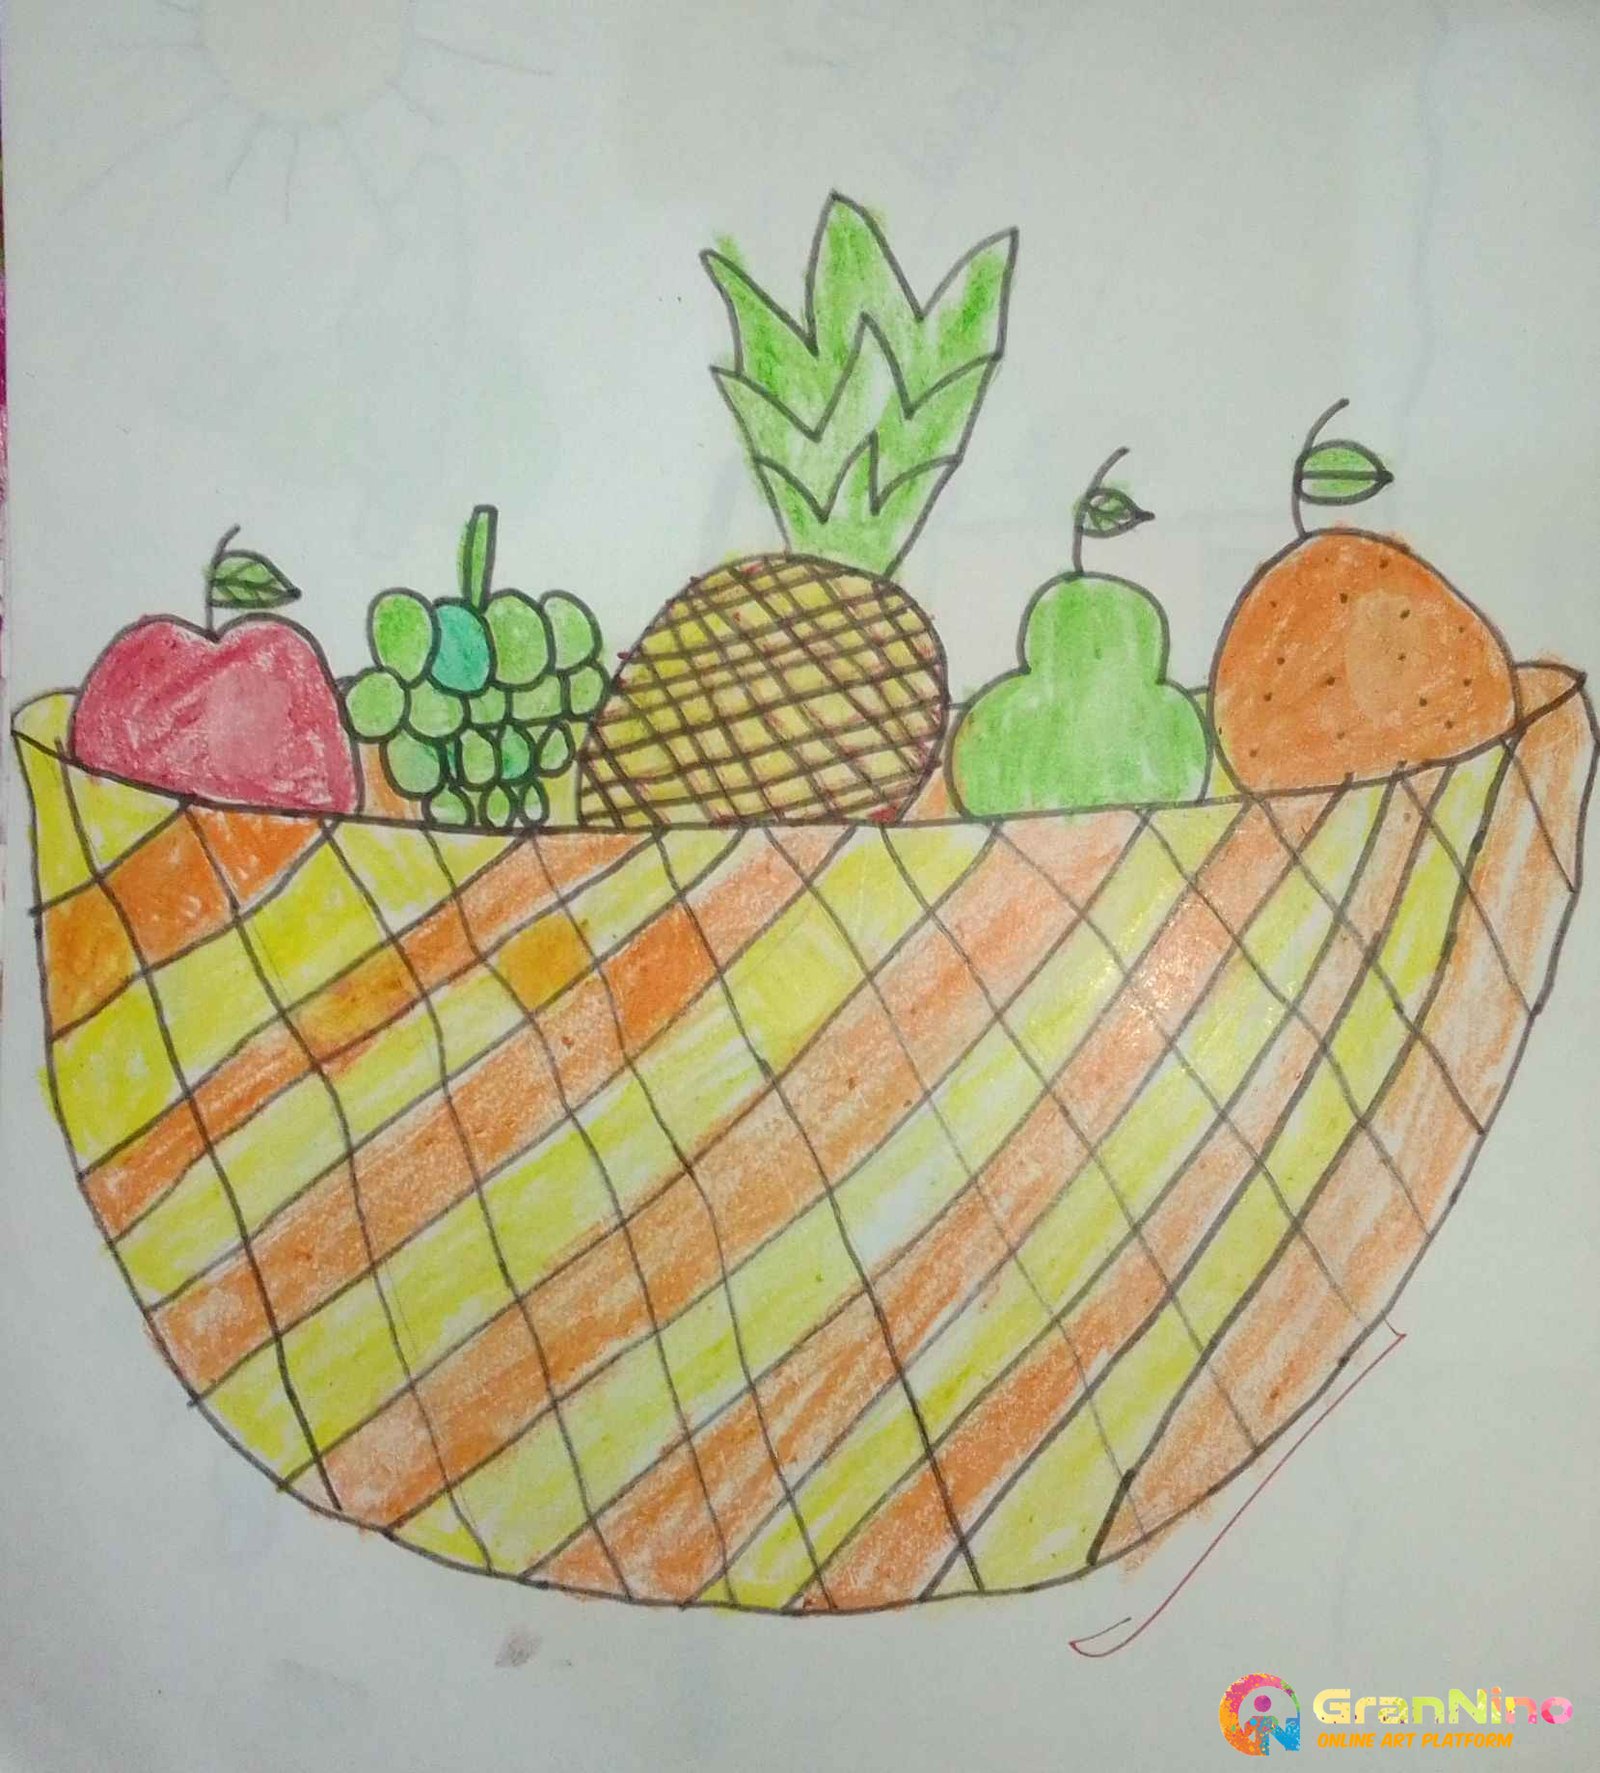 Fruit Basket Drawing Easy with Pencil Shading | Pencil Sketch Drawing  Tutorials - YouTube